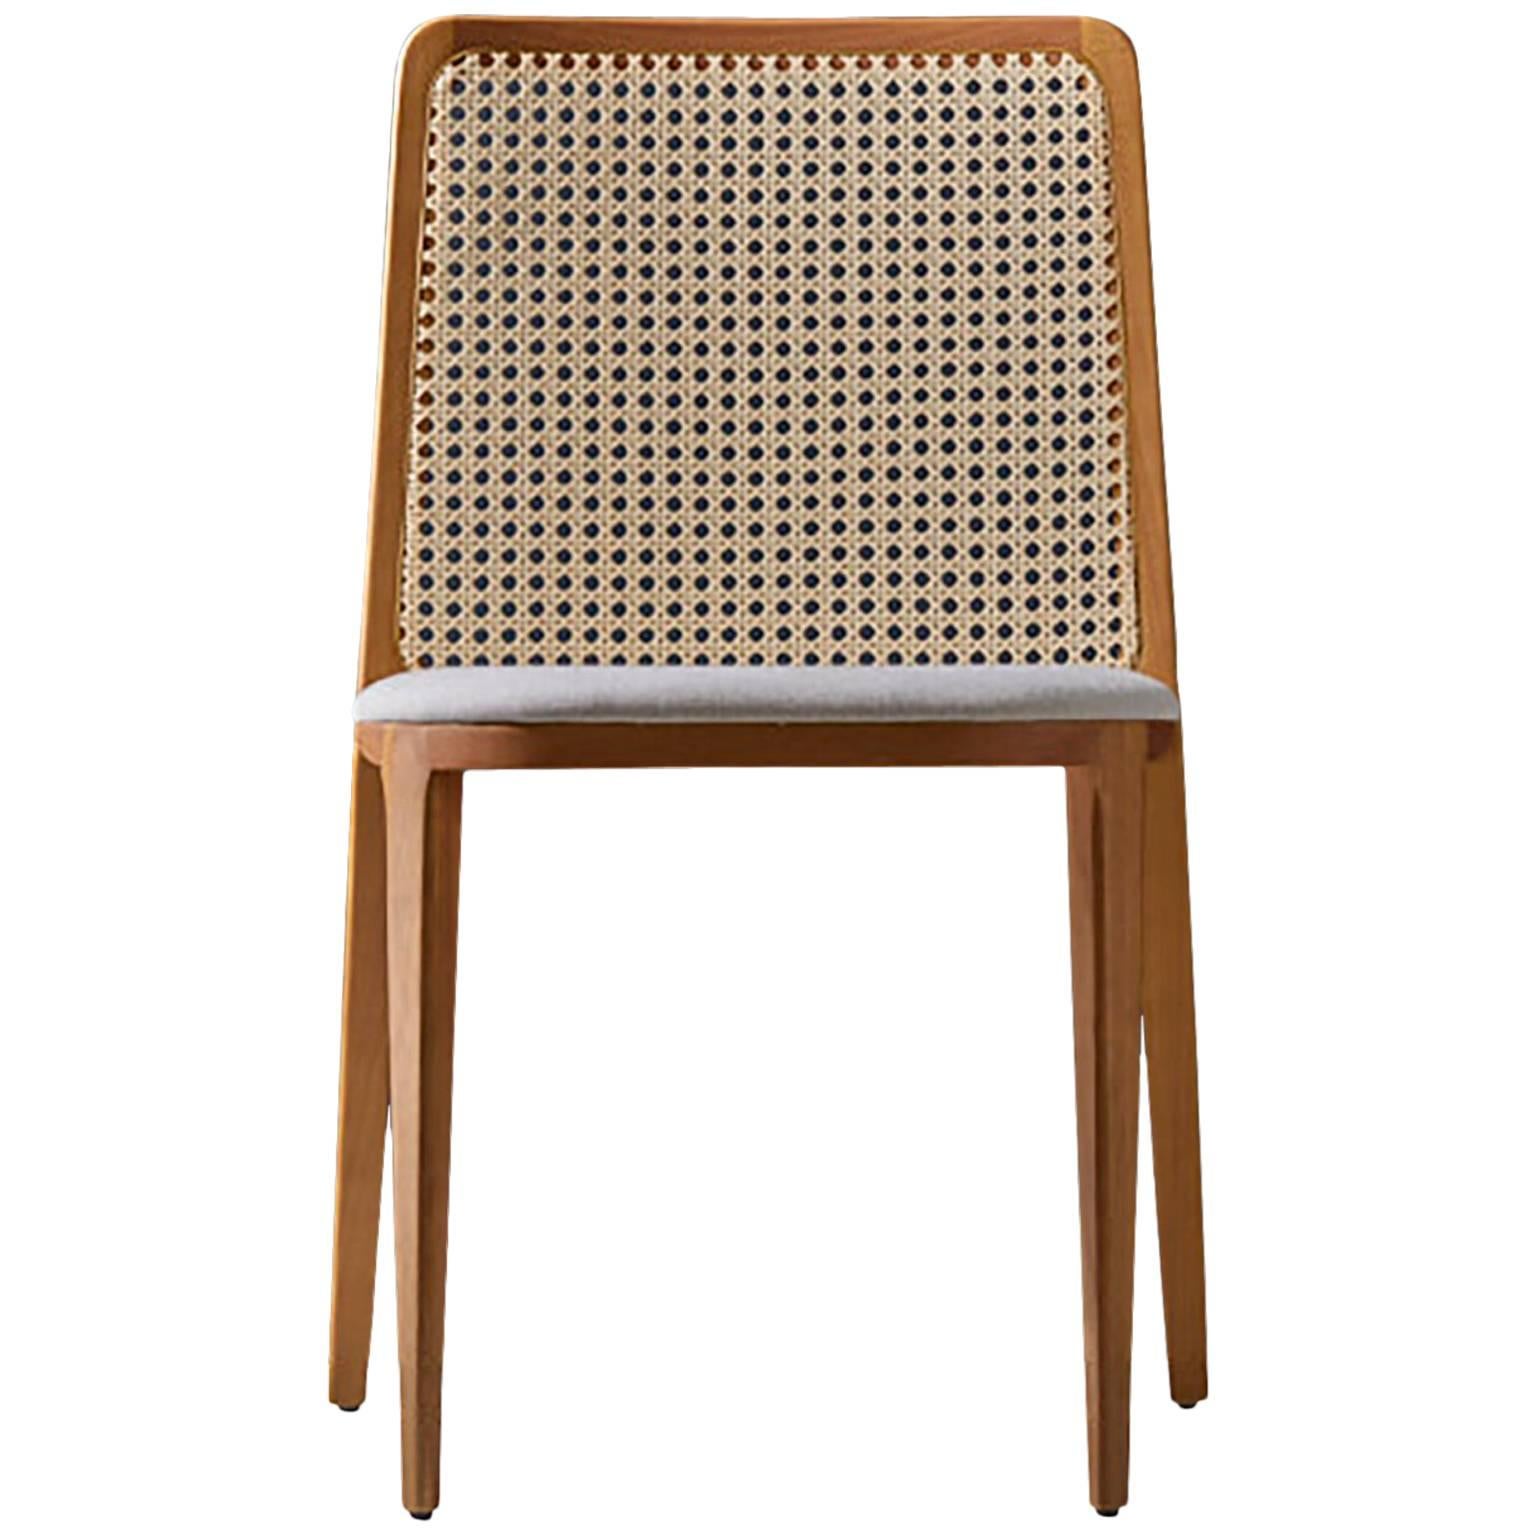 Minimal style, solid wood chair, textiles or leather seatings, caning backboard